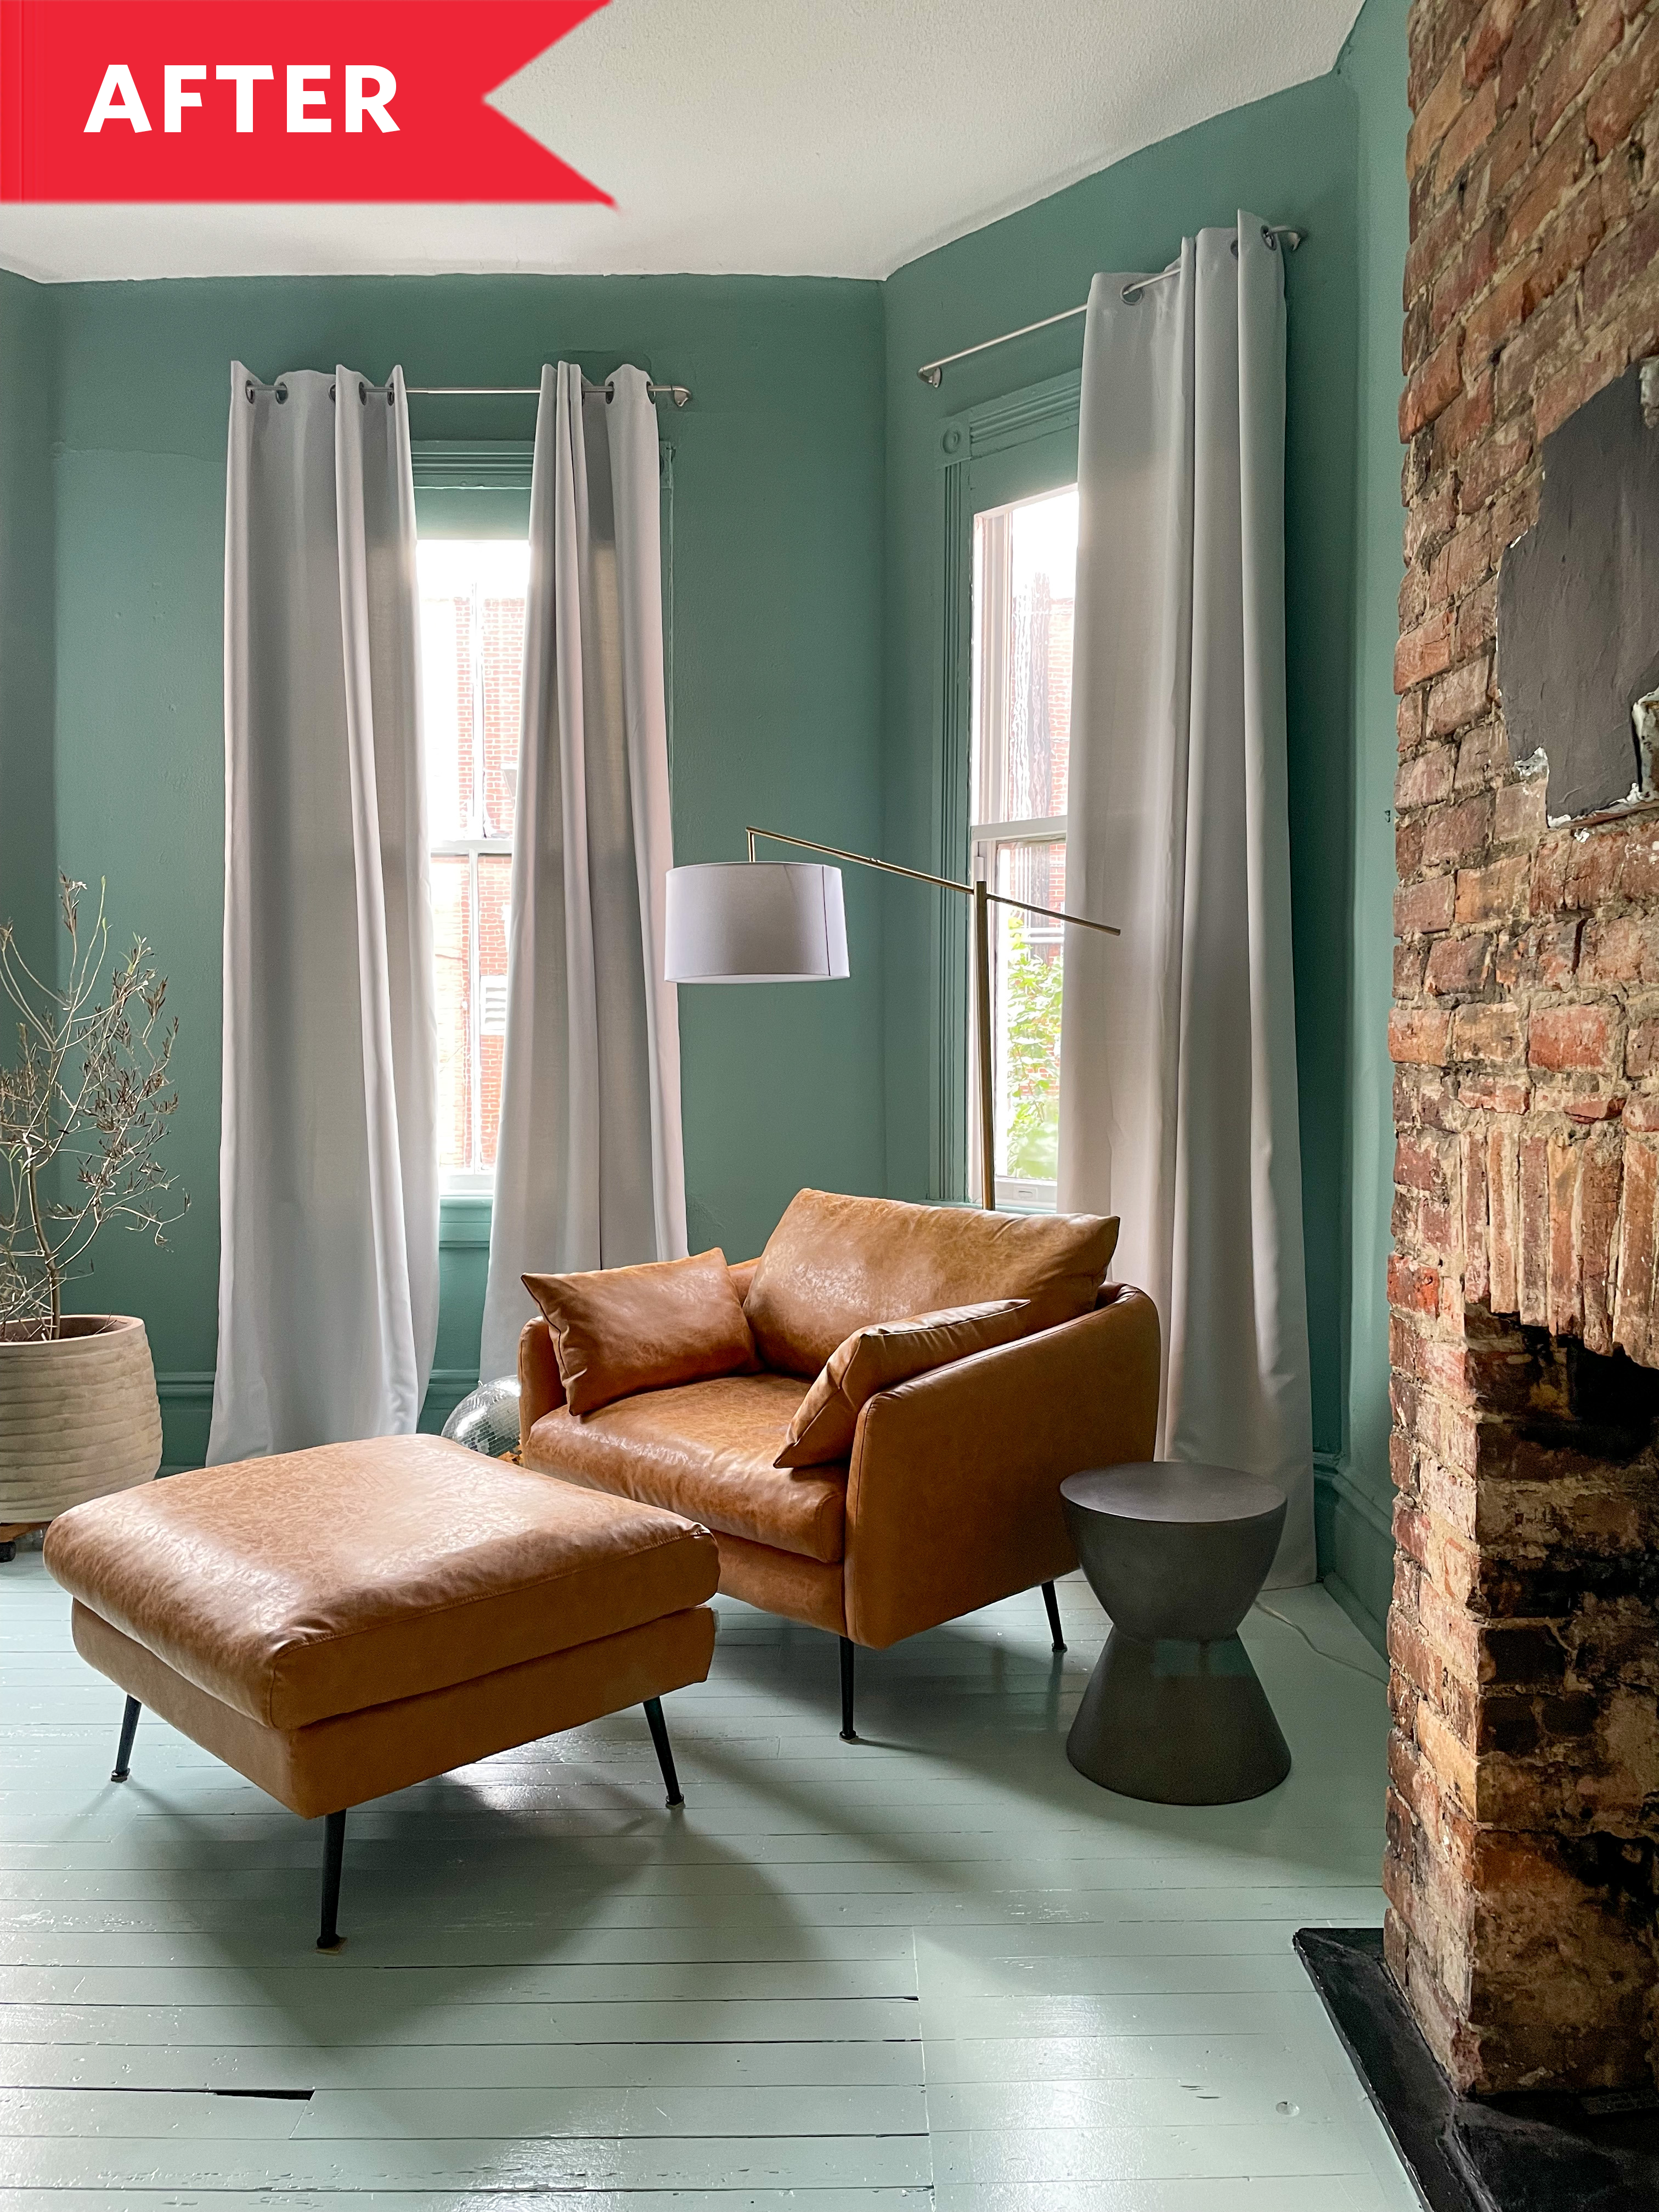 The Best Light Green Paint Colors To Inspire Your Next Room Makeover -  Culley Avenue